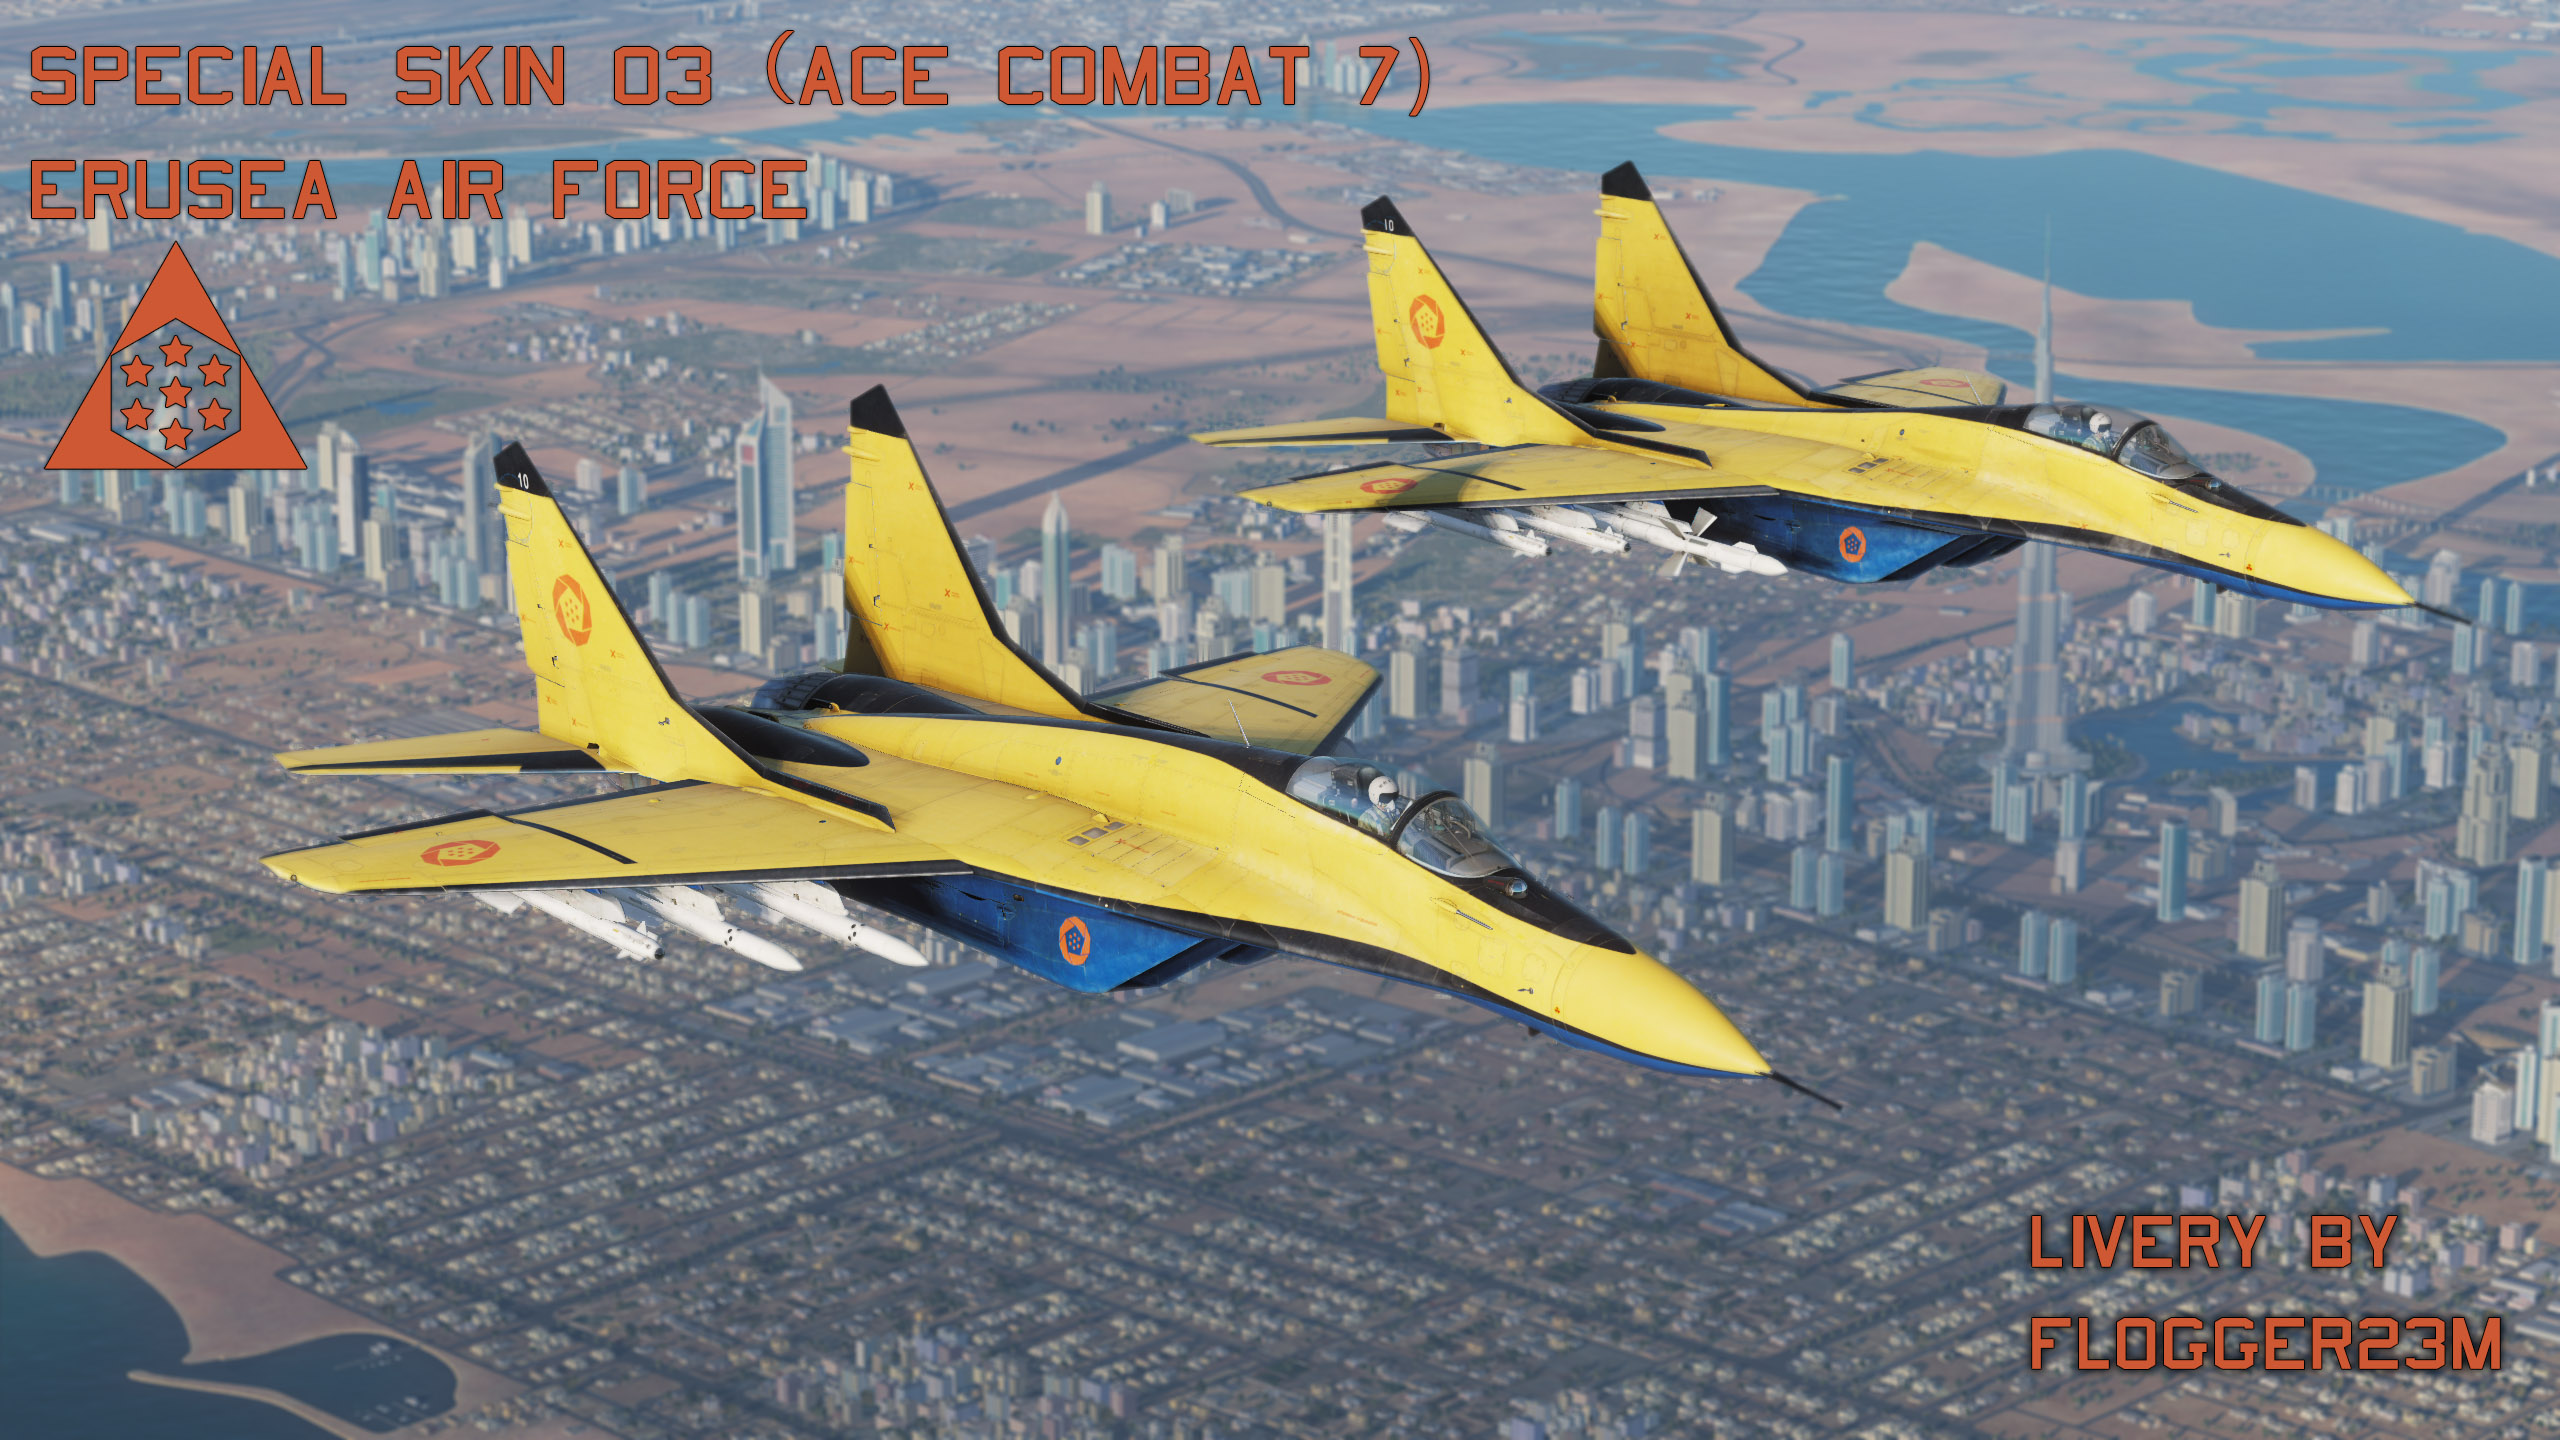 Erusean Air Force "Special Yellow Skin 03" Livery for DCS World/Flaming Cliffs 3 - By Flogger23m